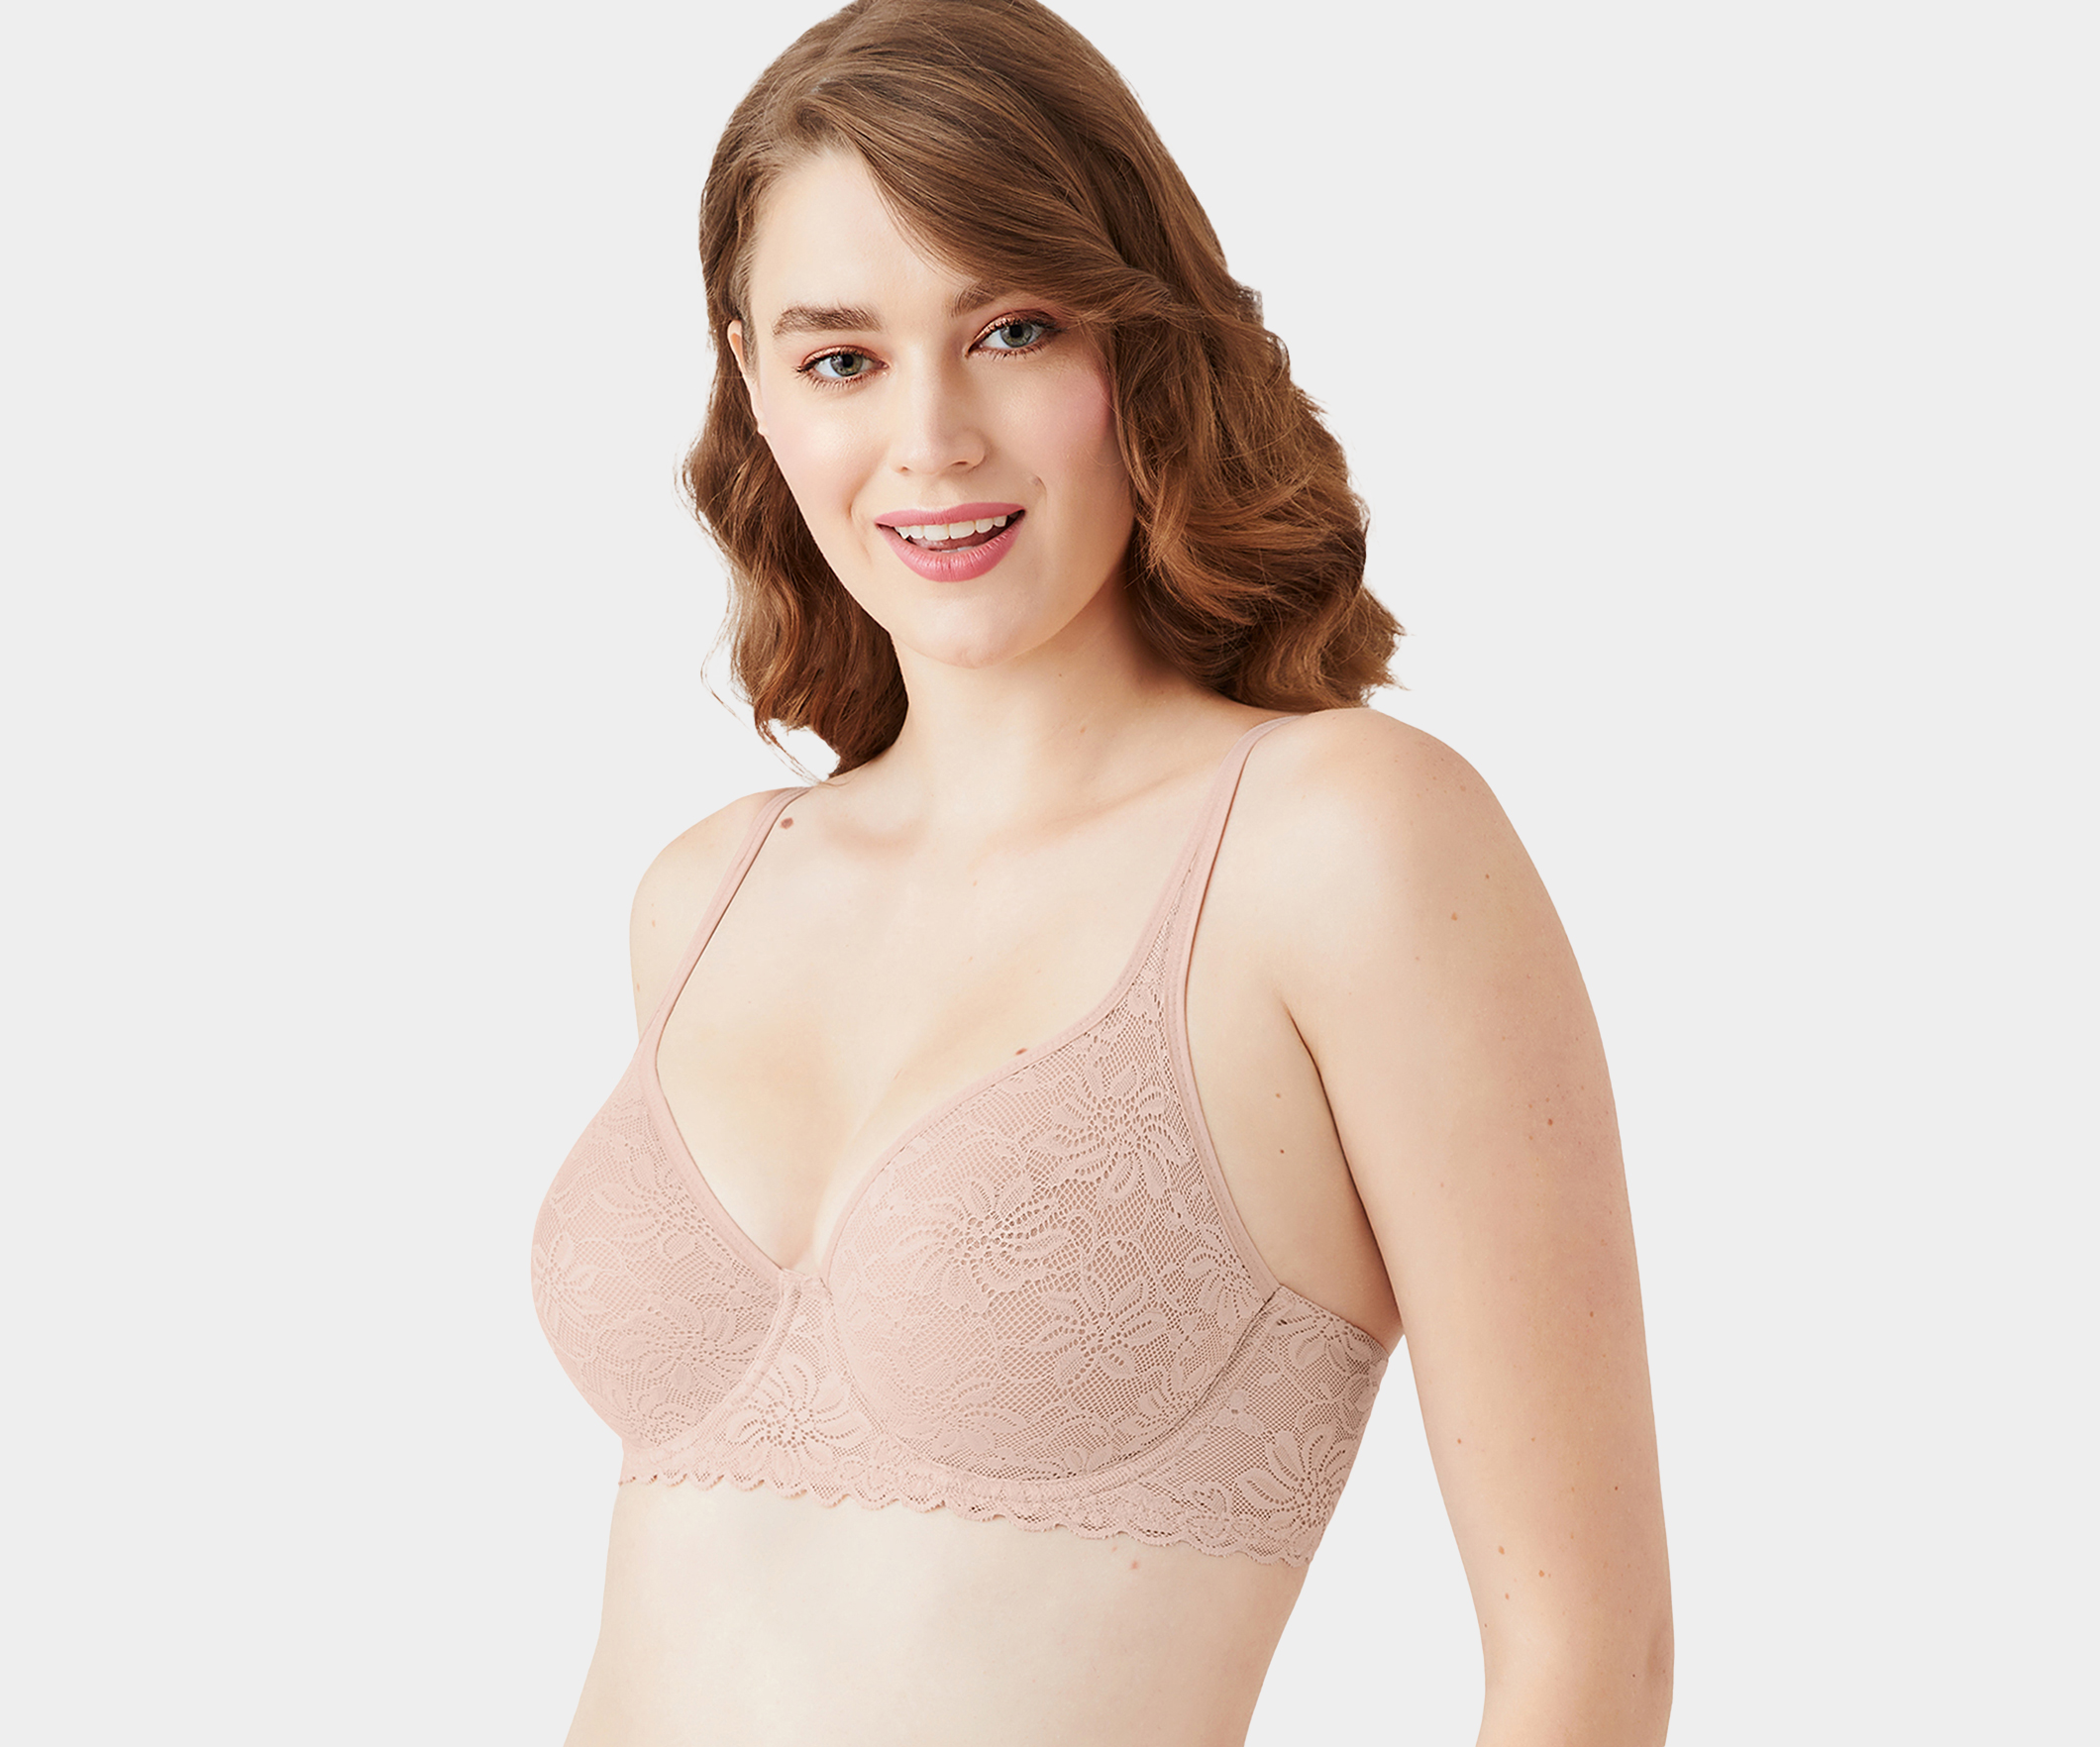 Bras for Round Breast Shapes - Best Bras for Round Boobs